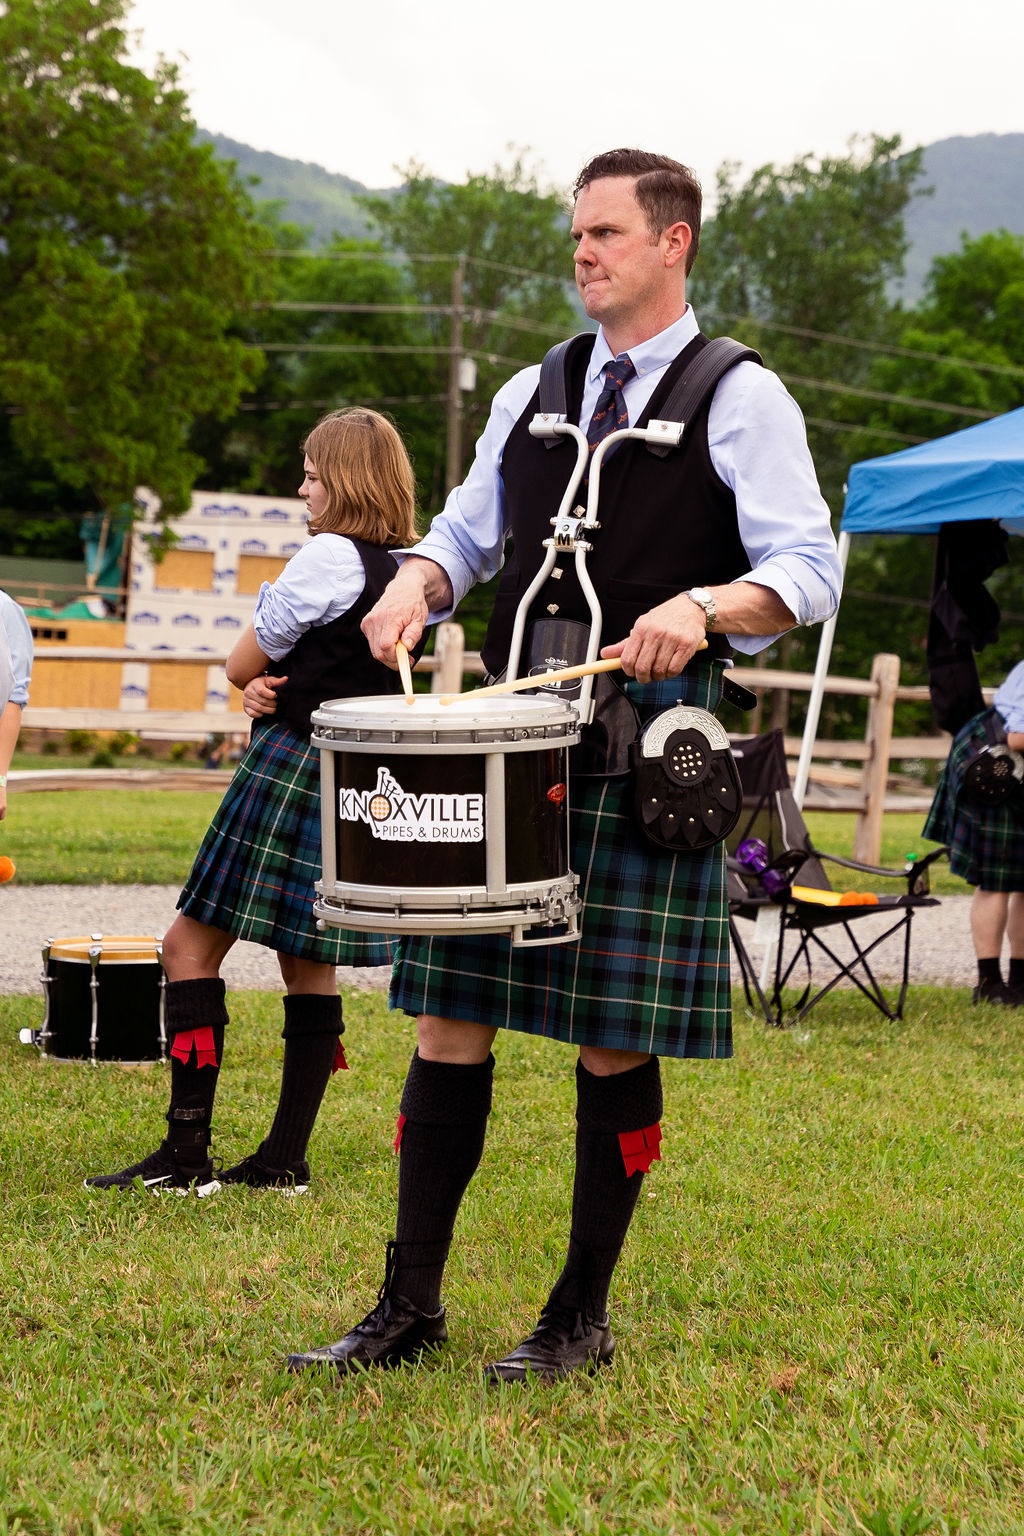 Drummer performing in Scottish Festival competition